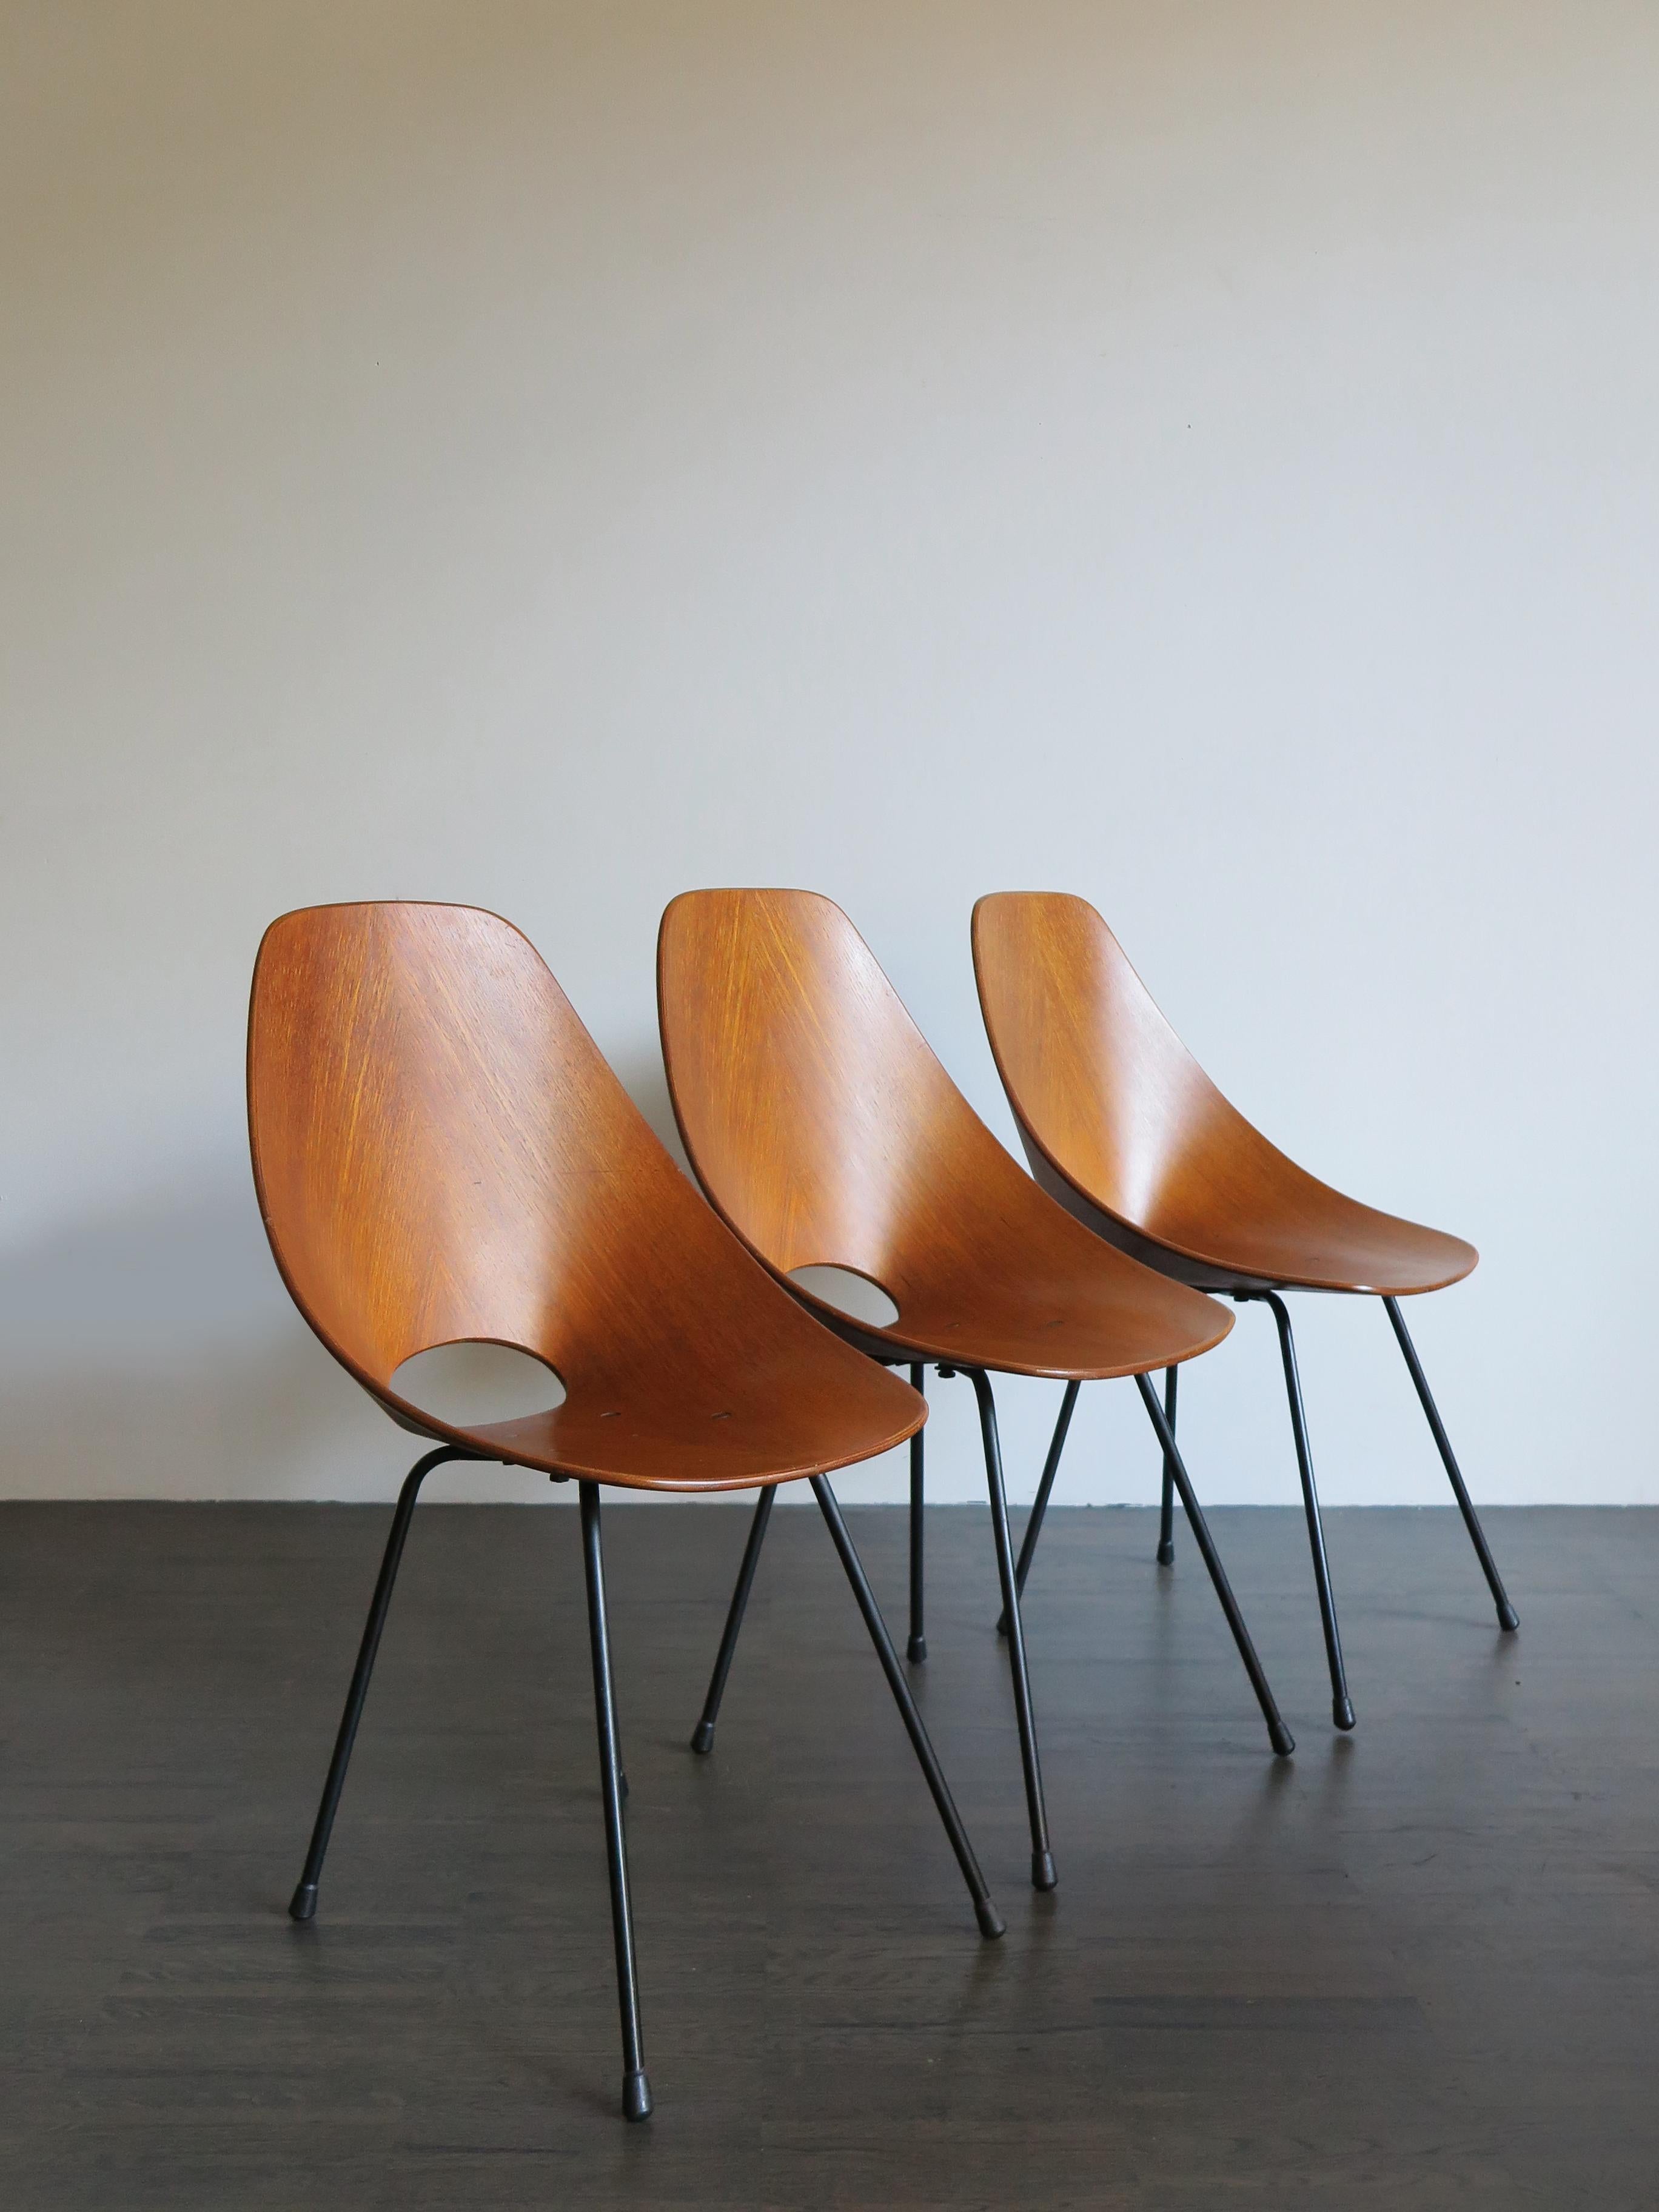 Italian midcentury set of three dining chairs model Medea designed by Vittorio Nobili and produced by Fratelli Tagliabue, veneered plywood, lacquered metal, this chair won the prestigious price “Compasso d’Oro in 1956.

Bibliography: G. Gramigna,